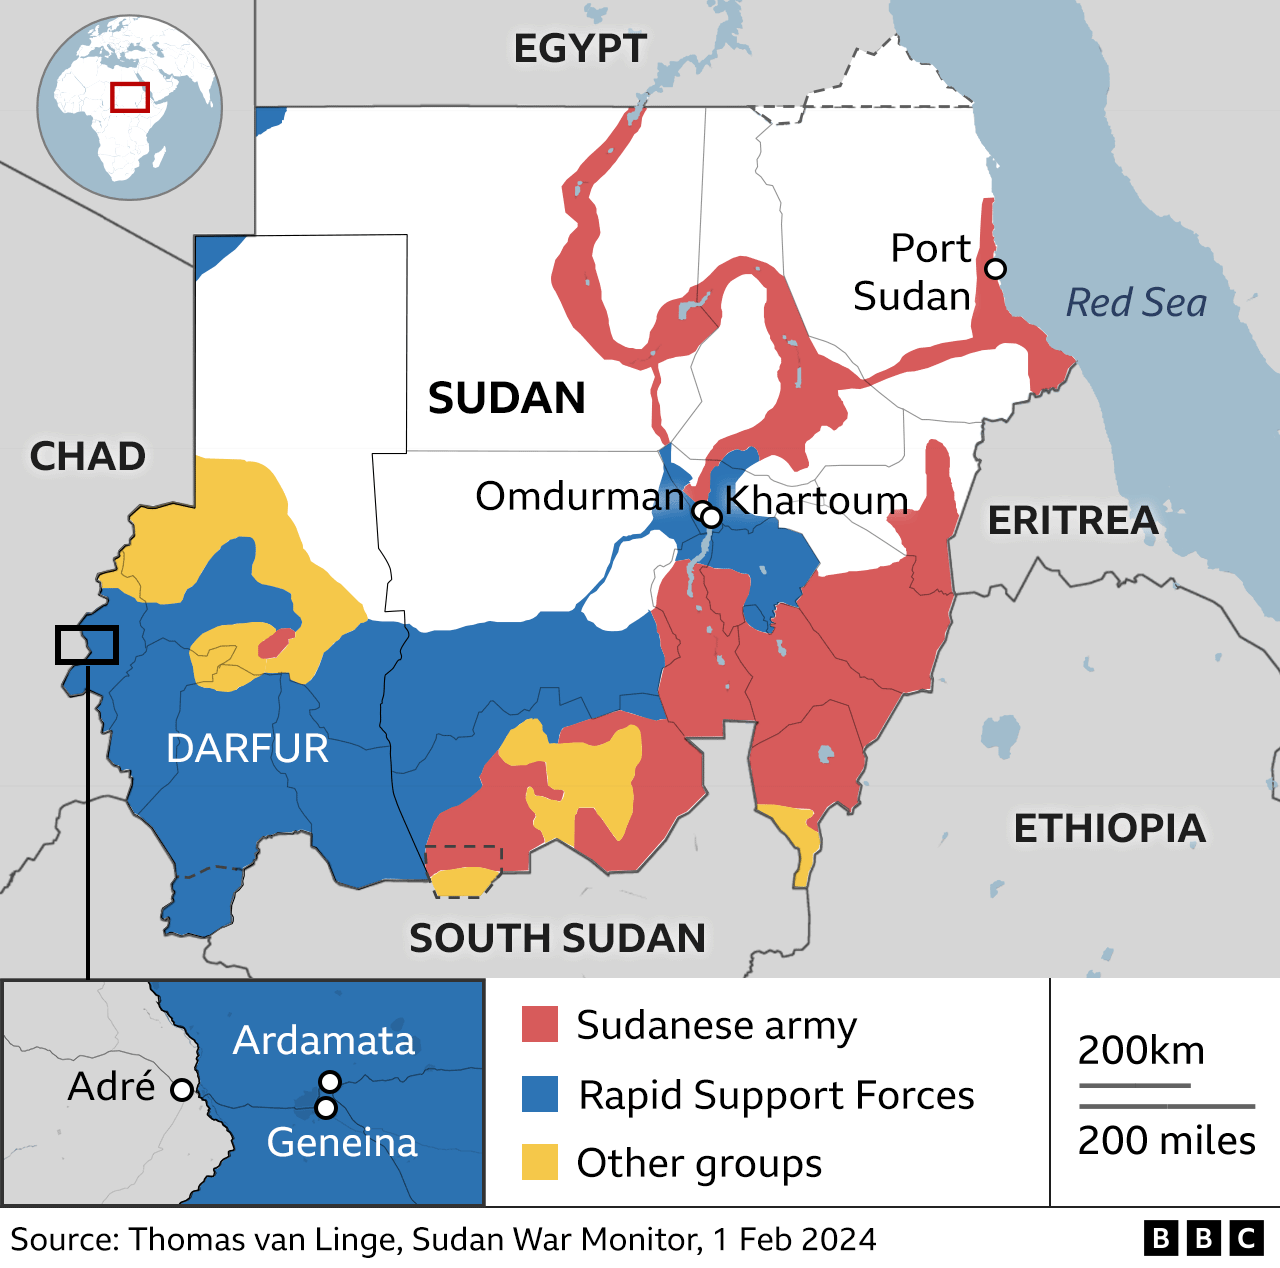 Map showing locations of Khartoum, Omdurman, Port Sudan and Ardamata and Geneina in Darfur, as well as areas of control of Sudan army and RSF.